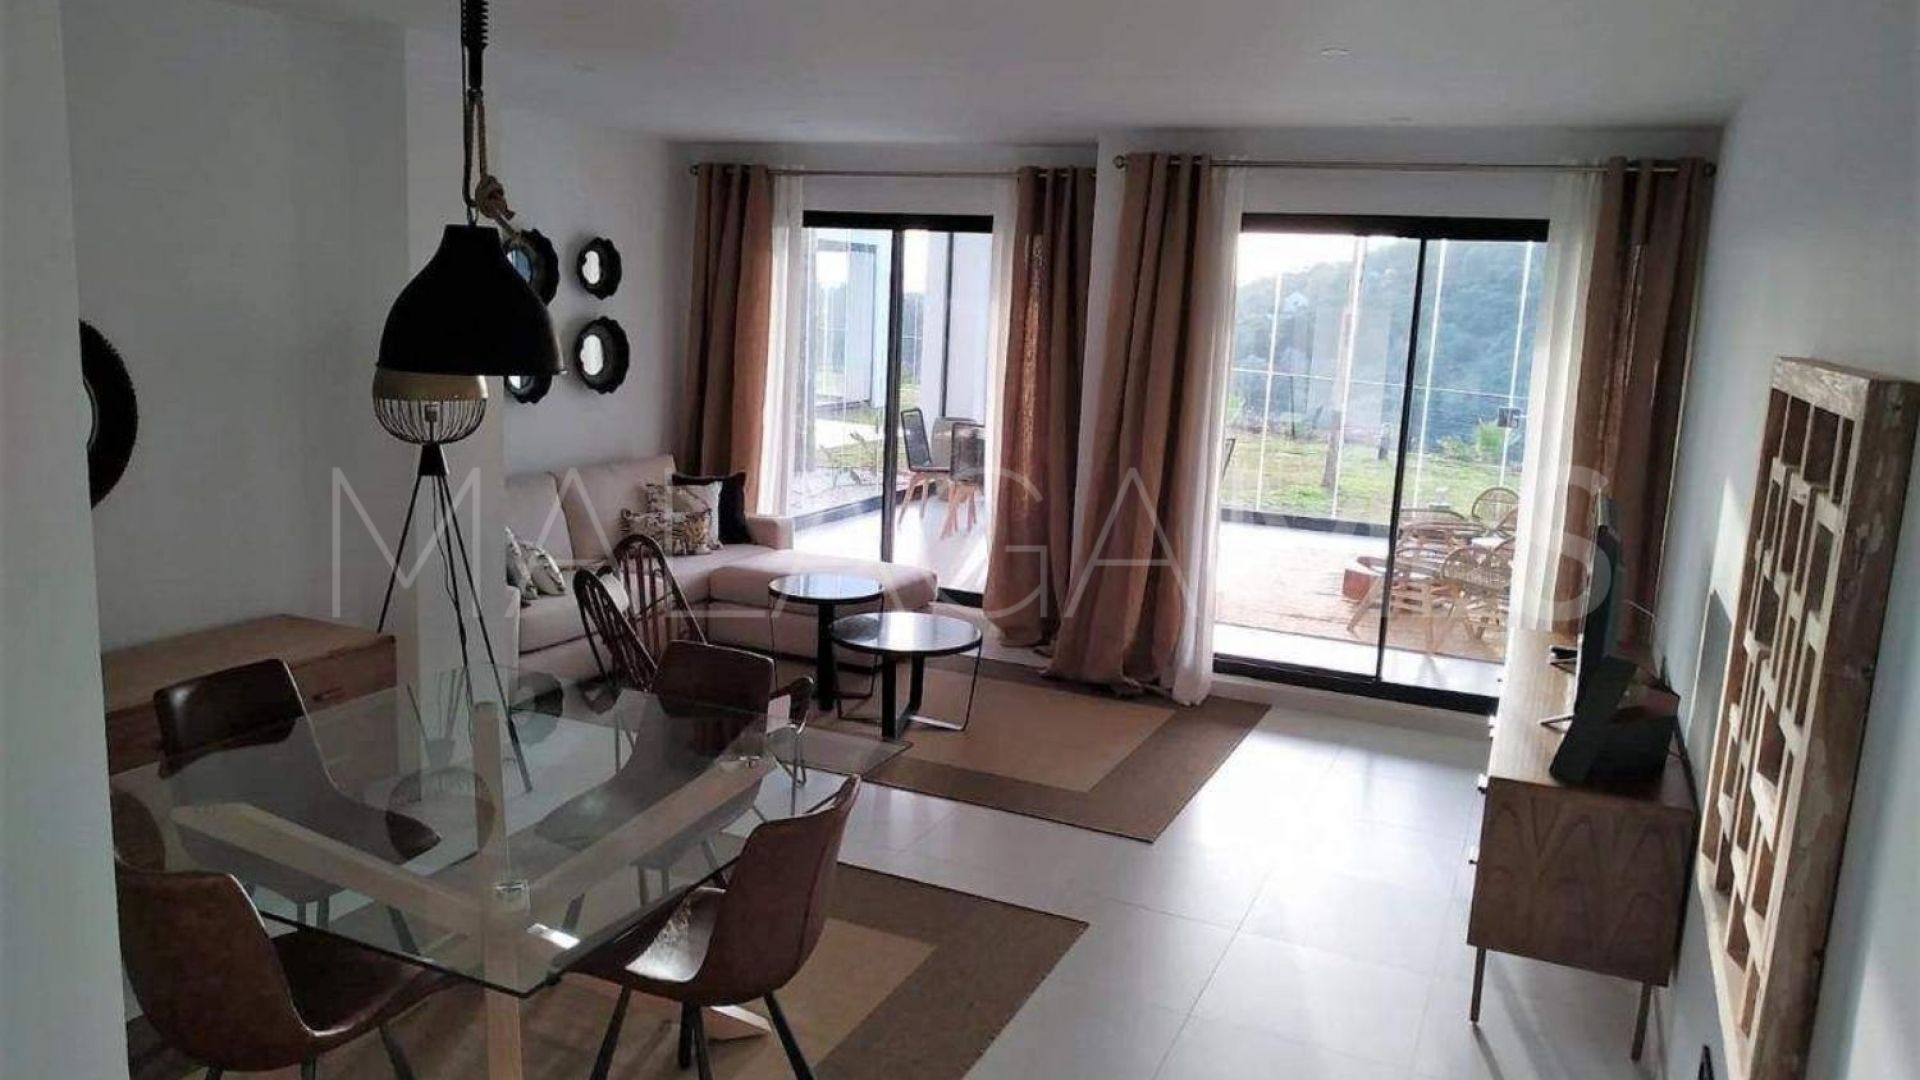 Penthouse with 2 bedrooms for sale in Los Reales - Sierra Estepona